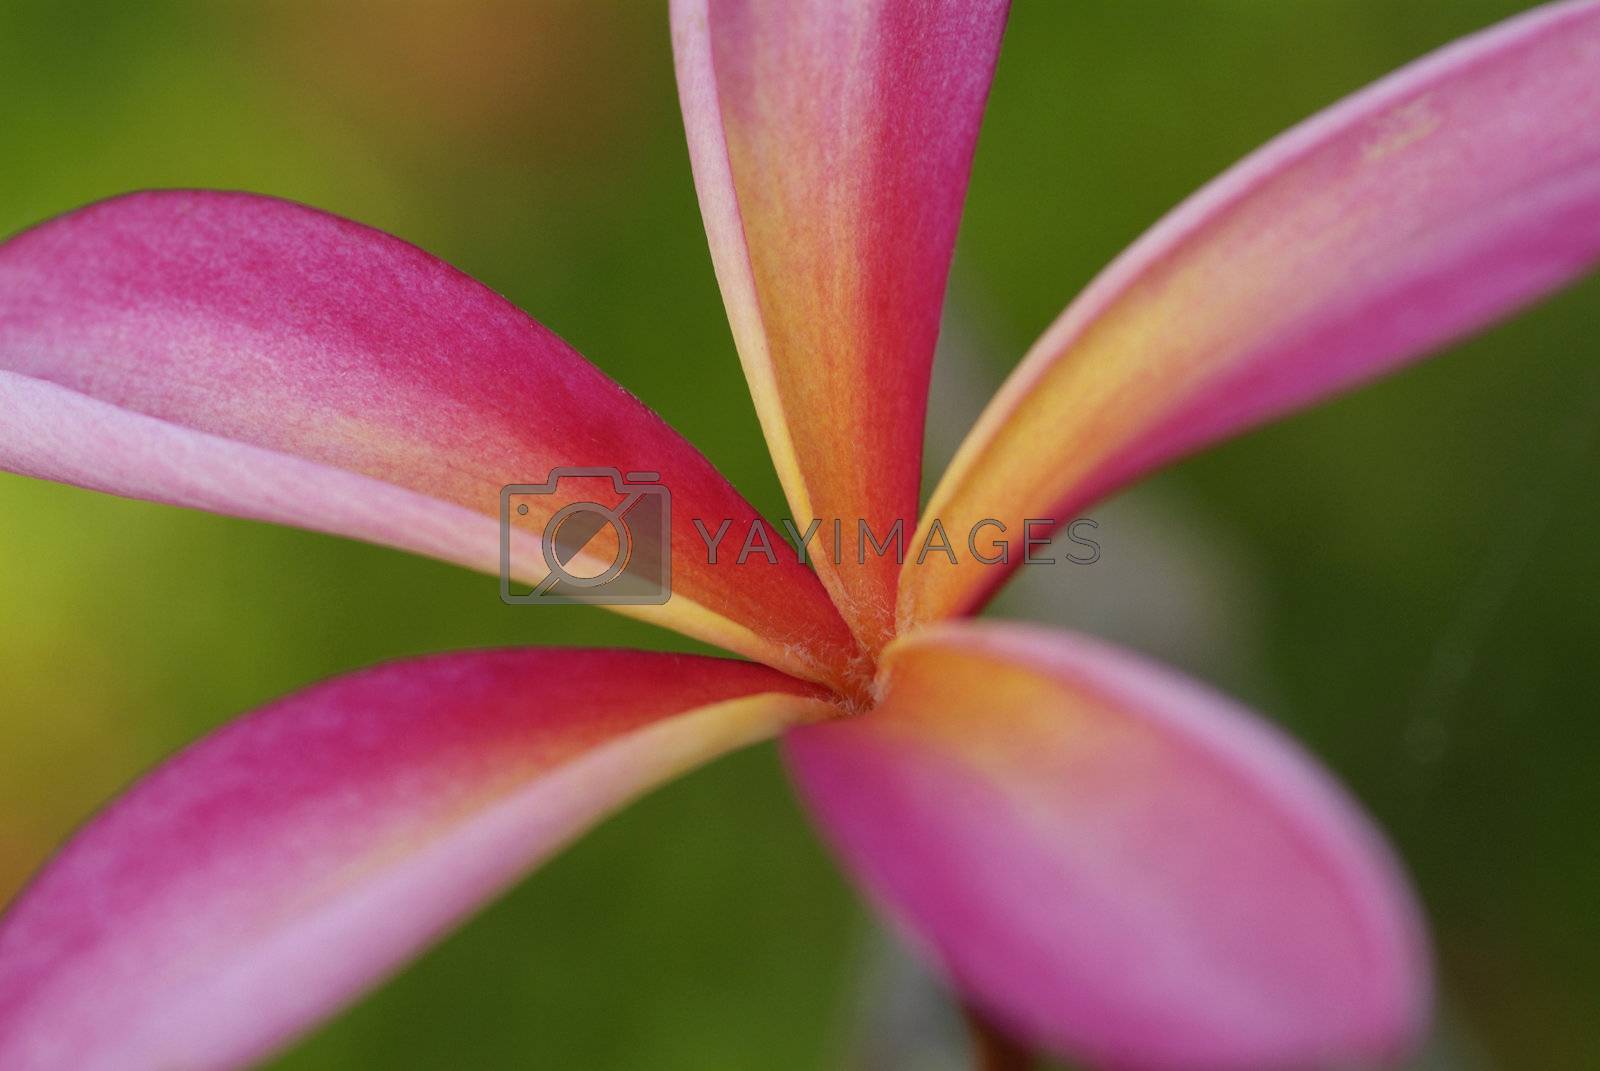 Royalty free image of Young leaf of plumeria by epixx